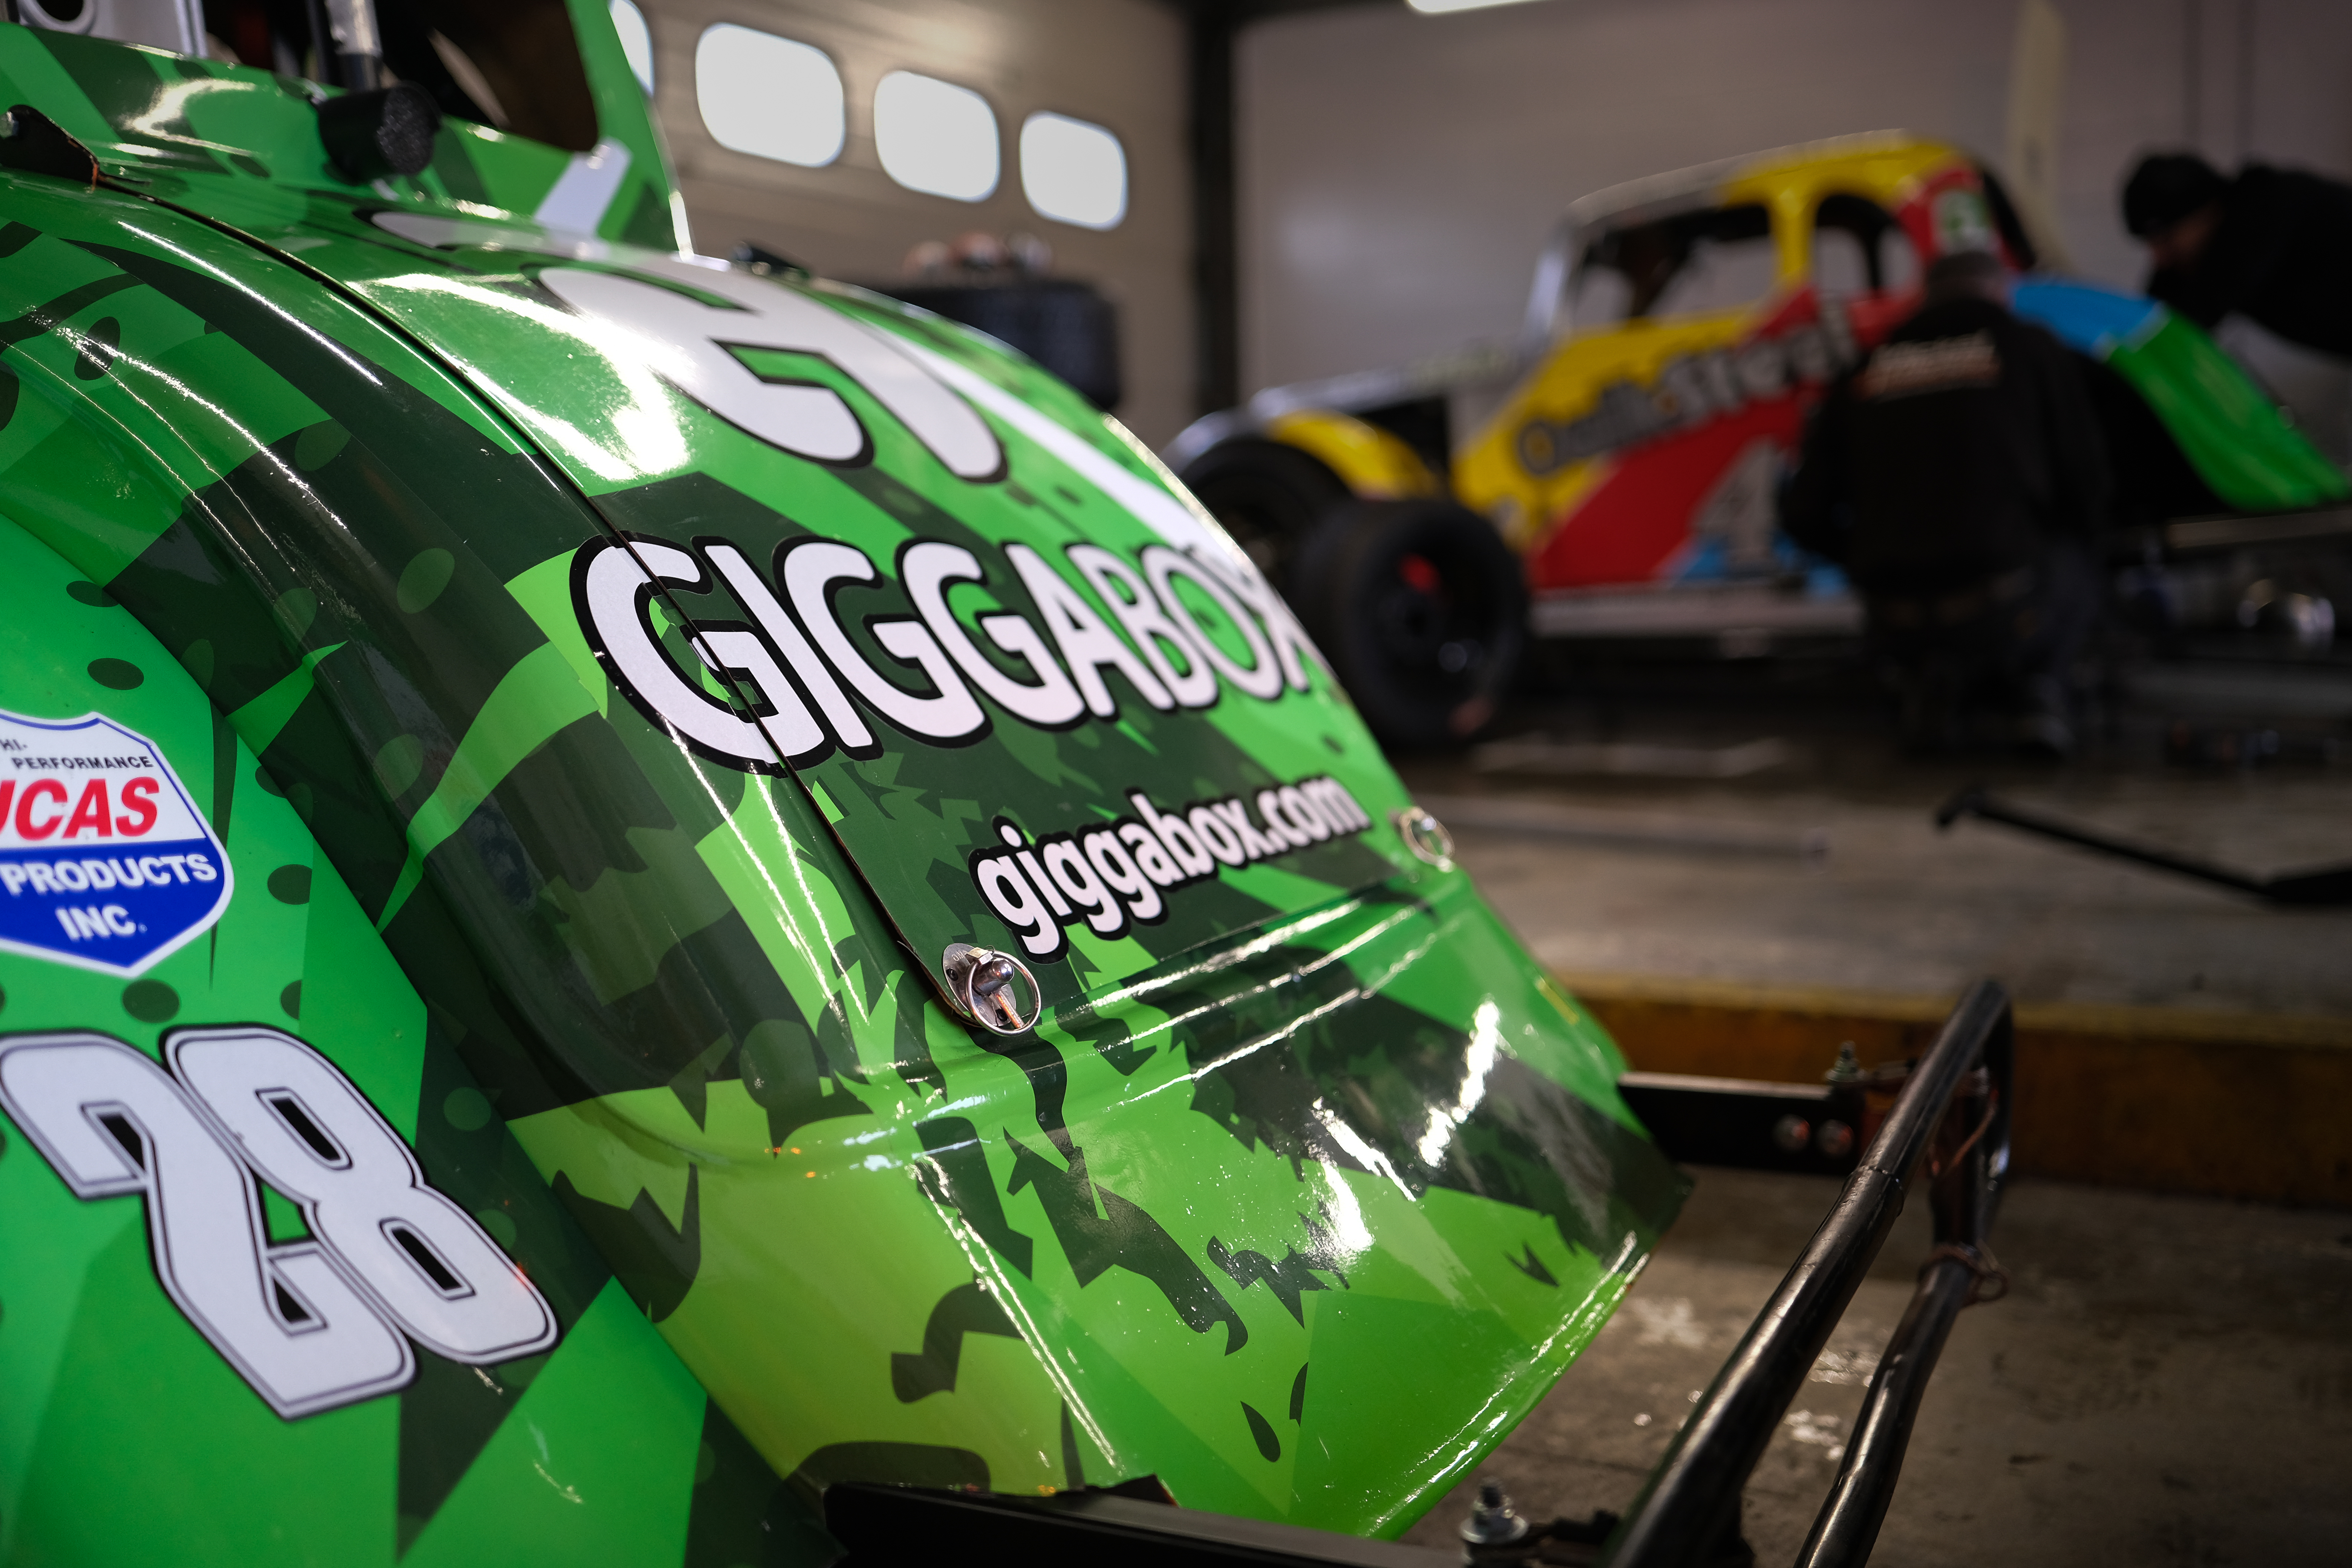 Giggabox Joins Legends Cars Championship for 2023 Season Gallery Image 46